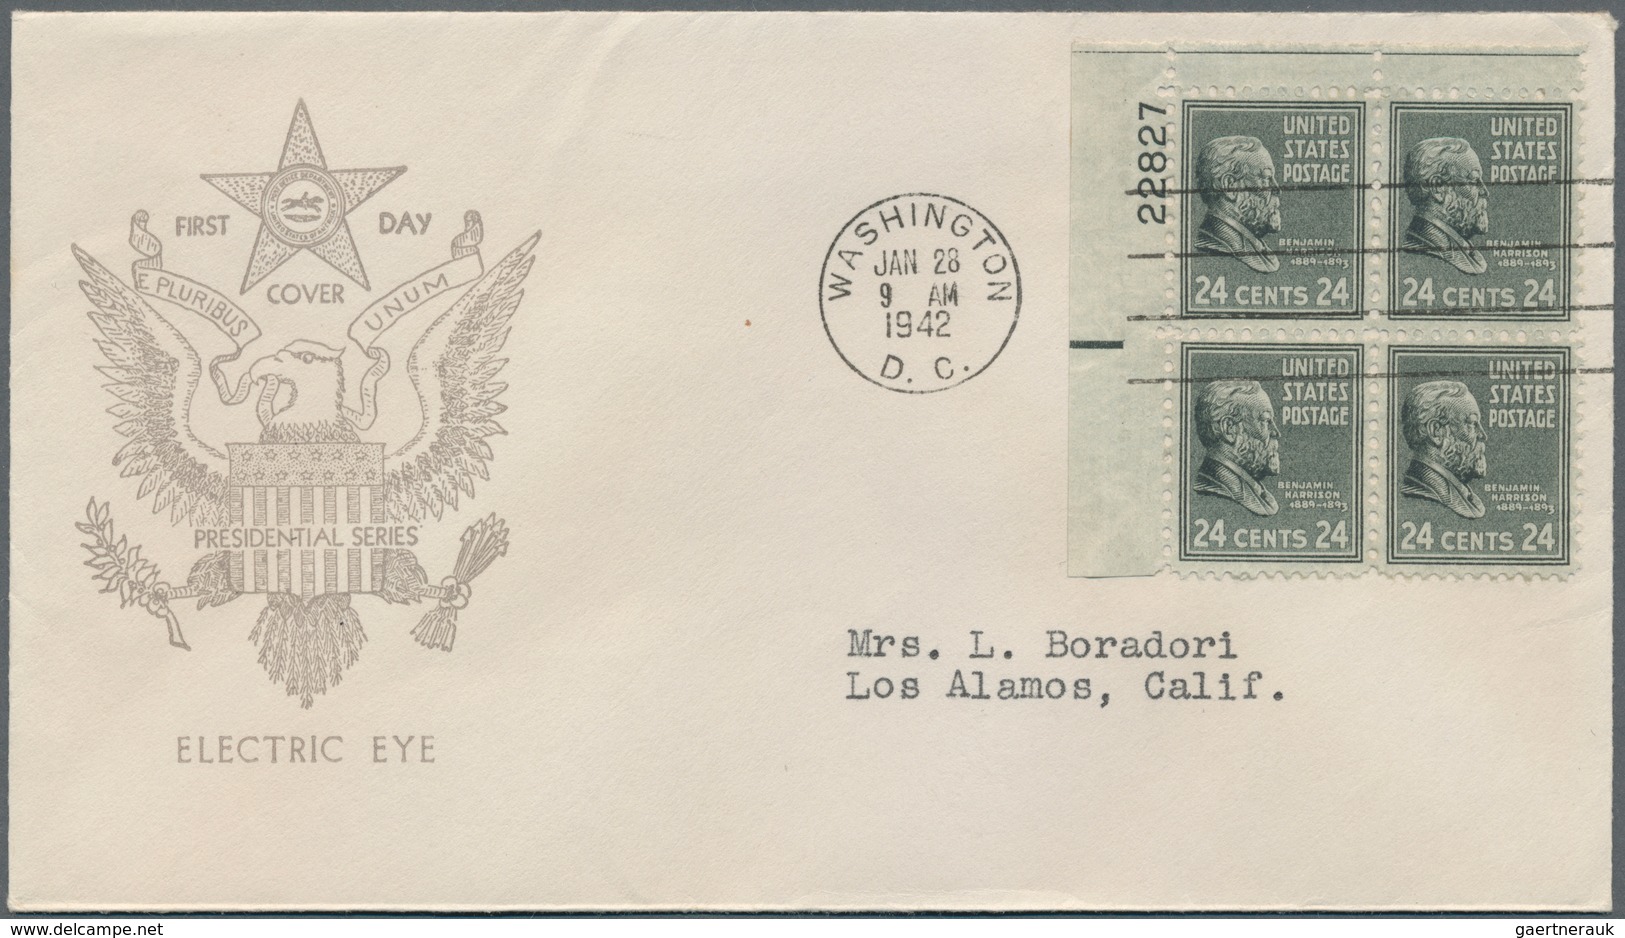 Vereinigte Staaten von Amerika: 1941/1942: 116 good FDC, many Plate Blocks, all FDC are with Borders